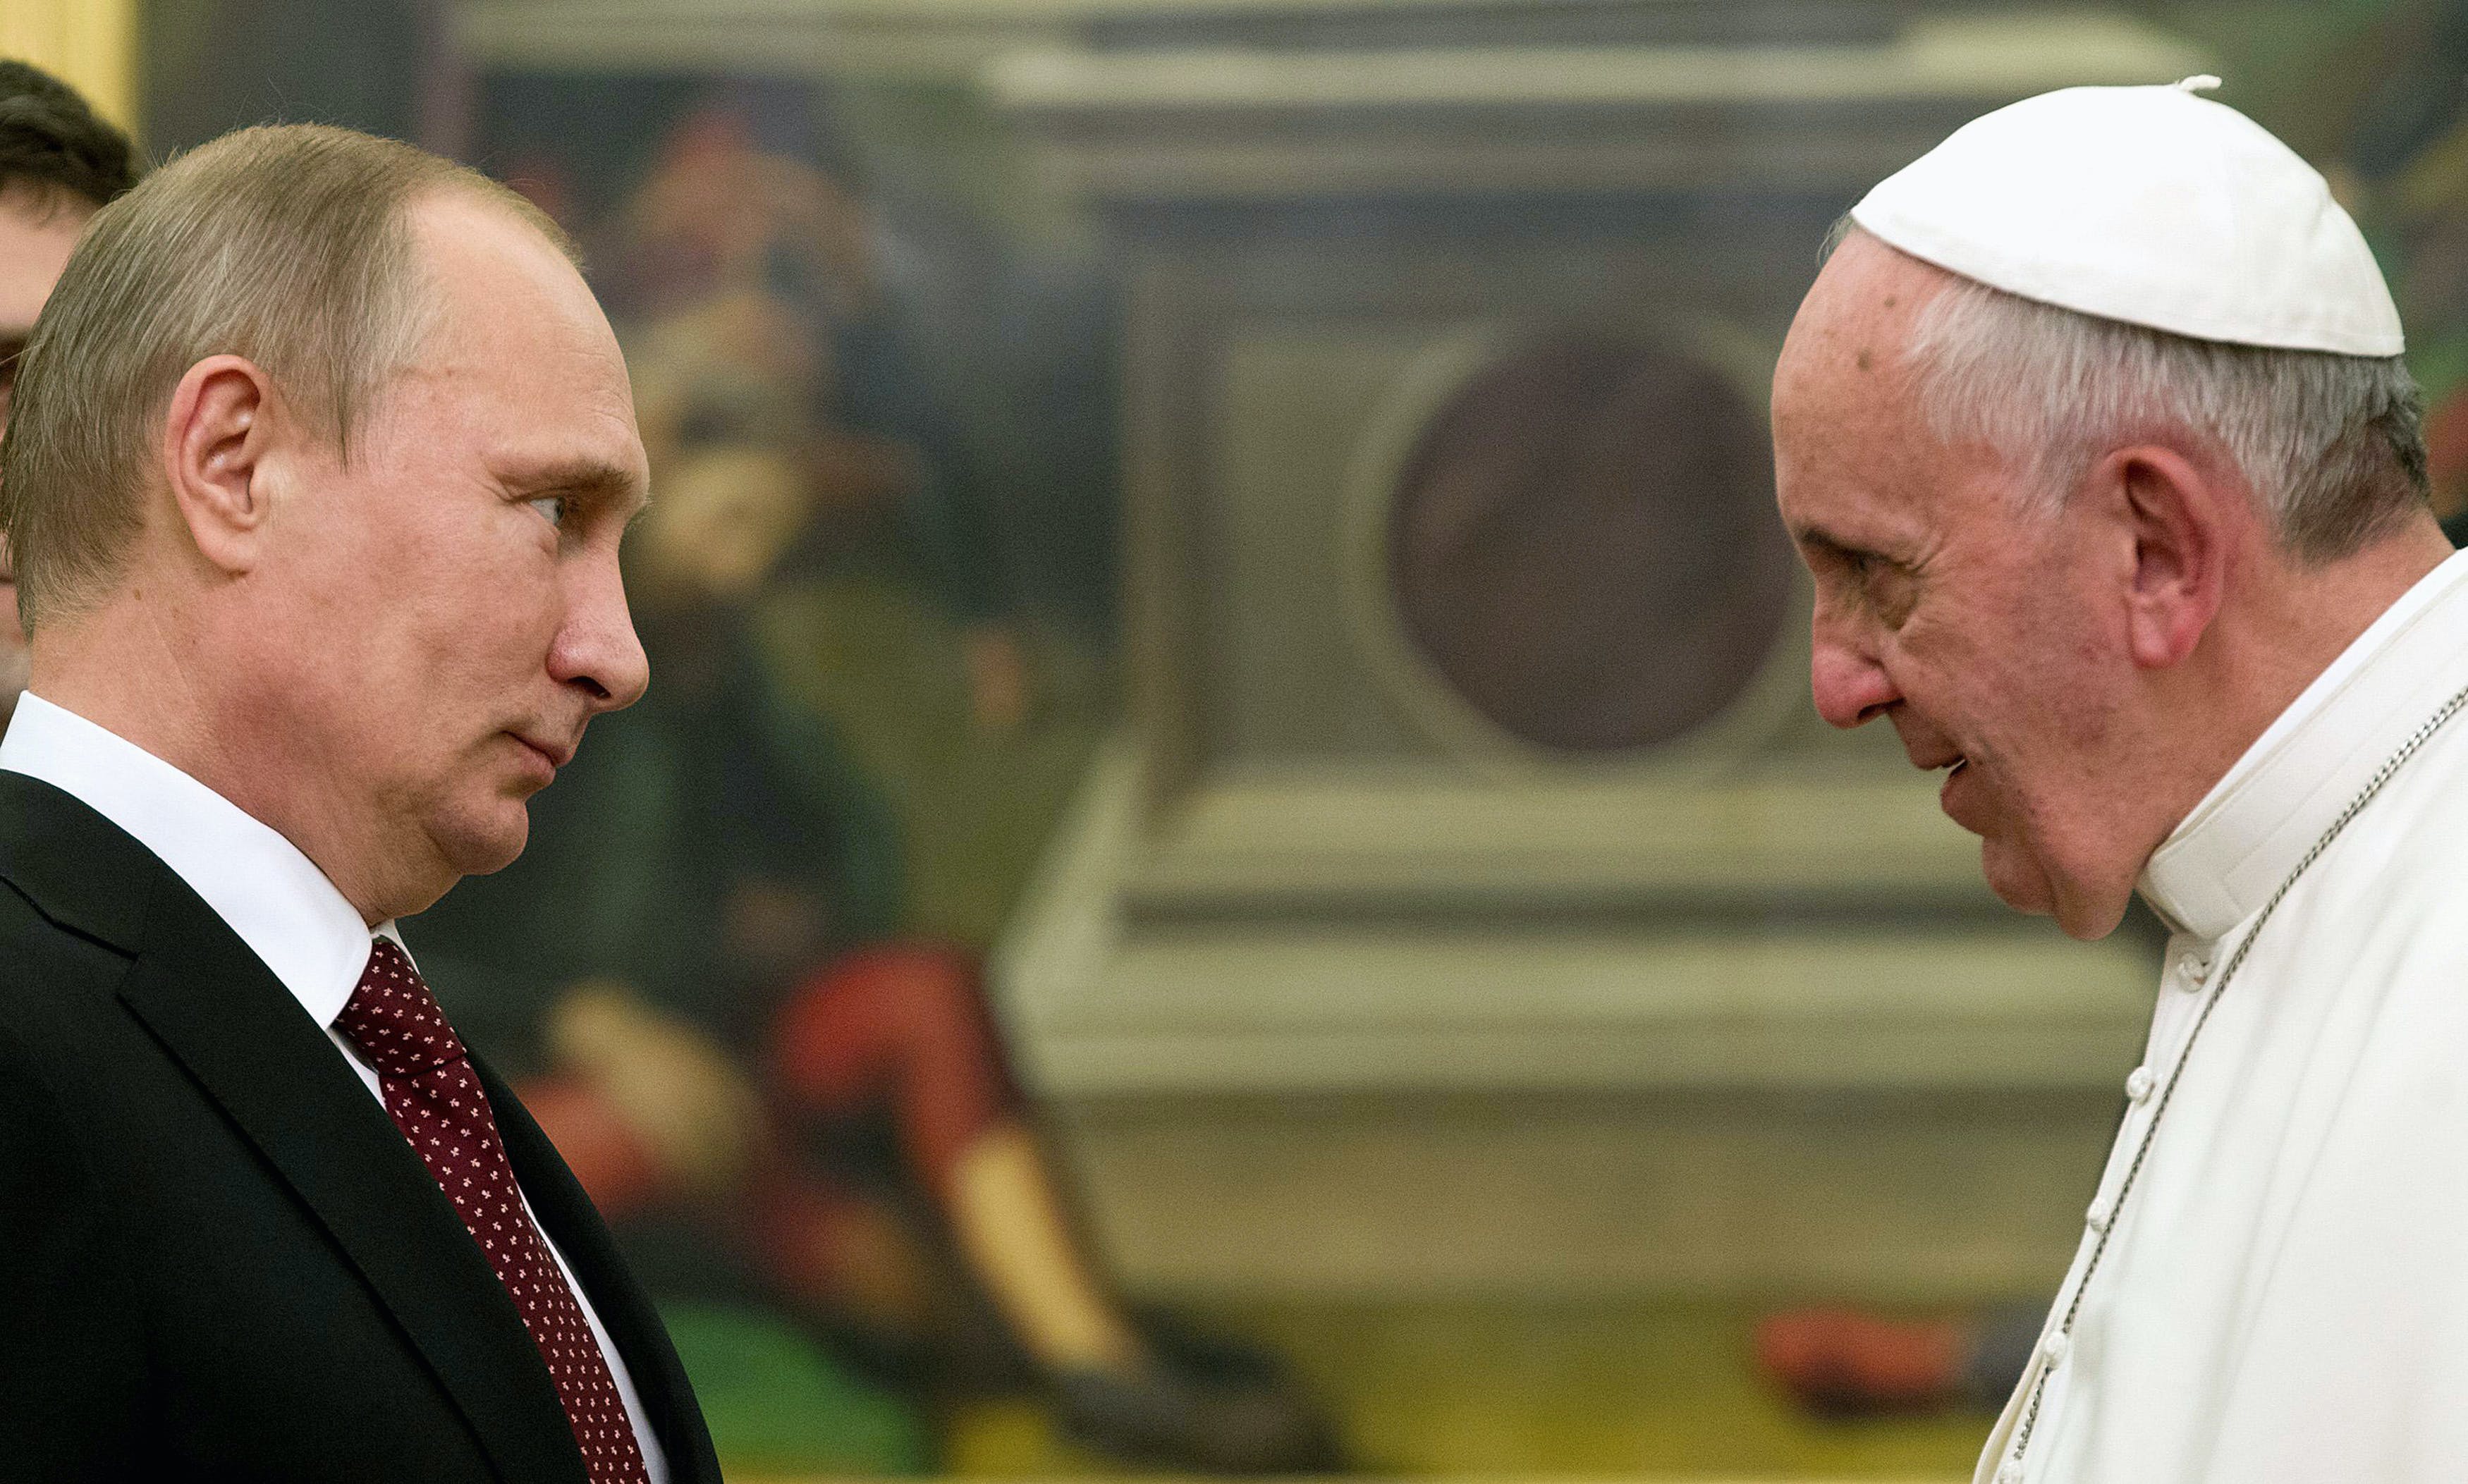 Pope Francis meets Russia's President Vladimir Putin during a private audience at the Vatican